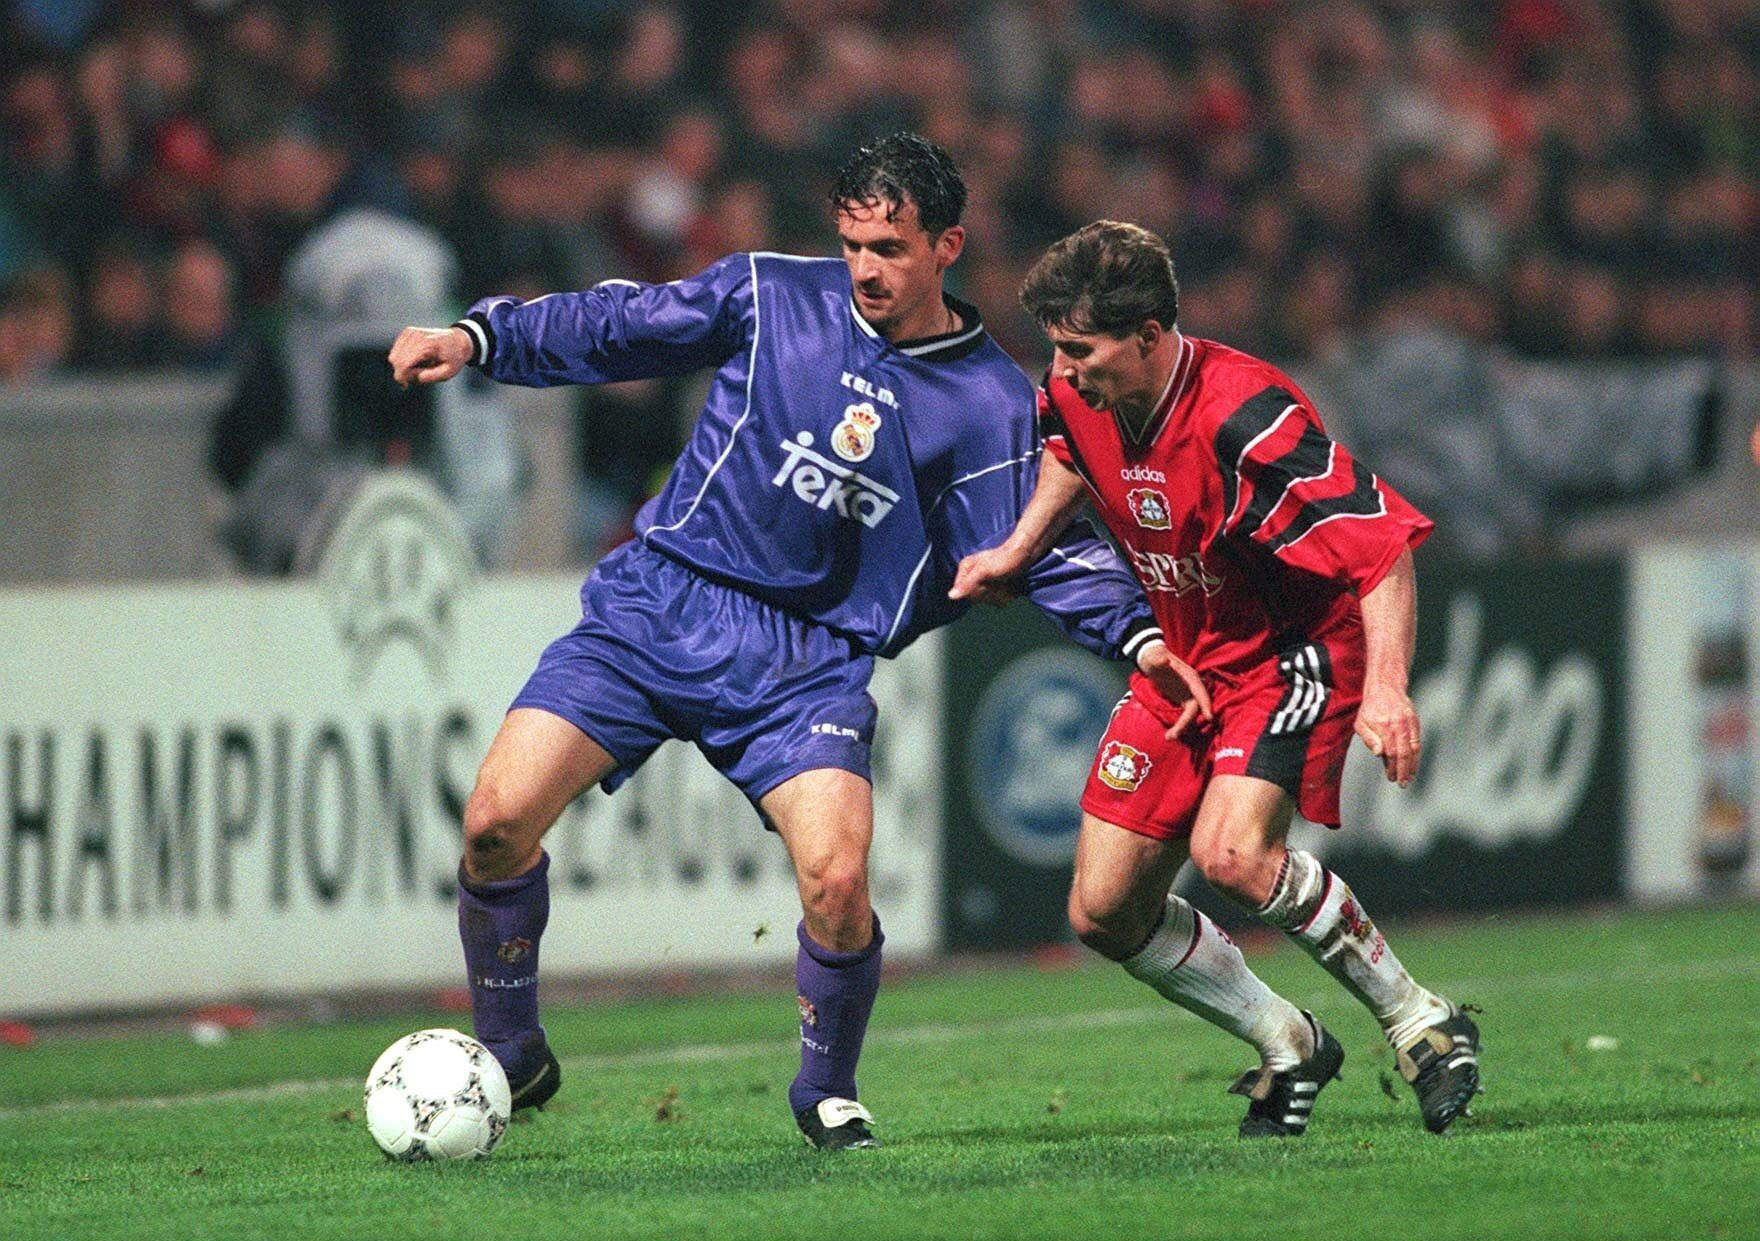 Predrag Mijatovic on the ball against Bayer Leverkusen in the Champions League in 1998.